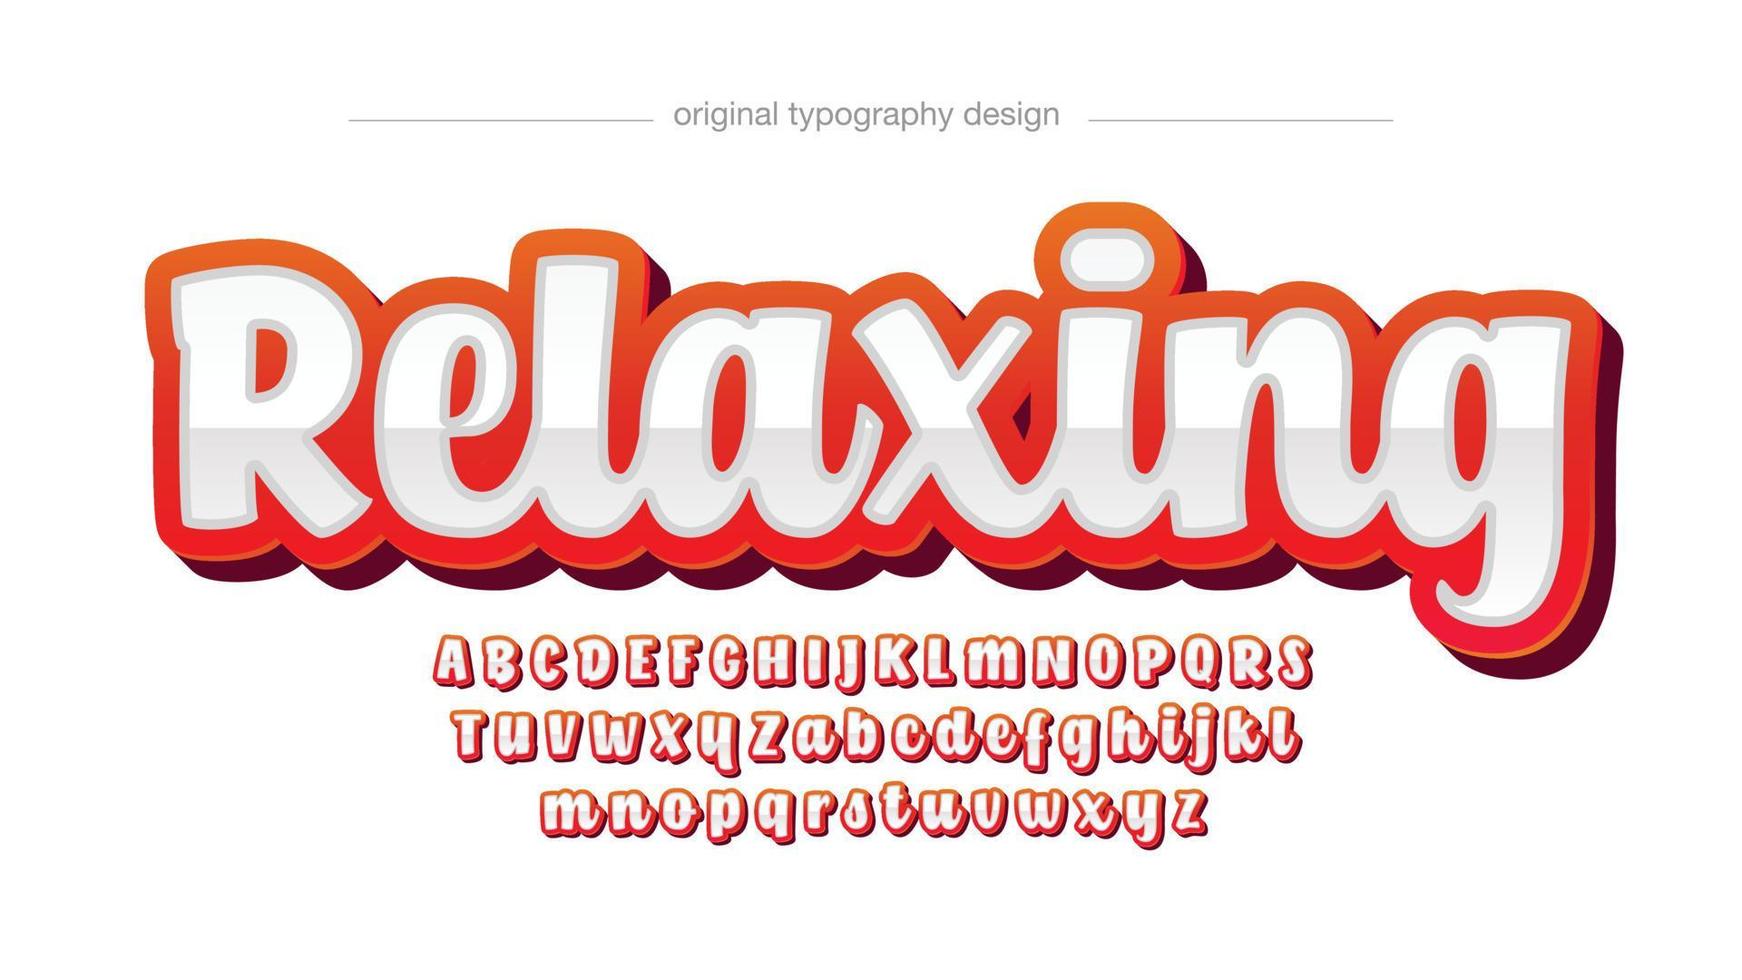 chrome cartoon with red outline 3d typography vector